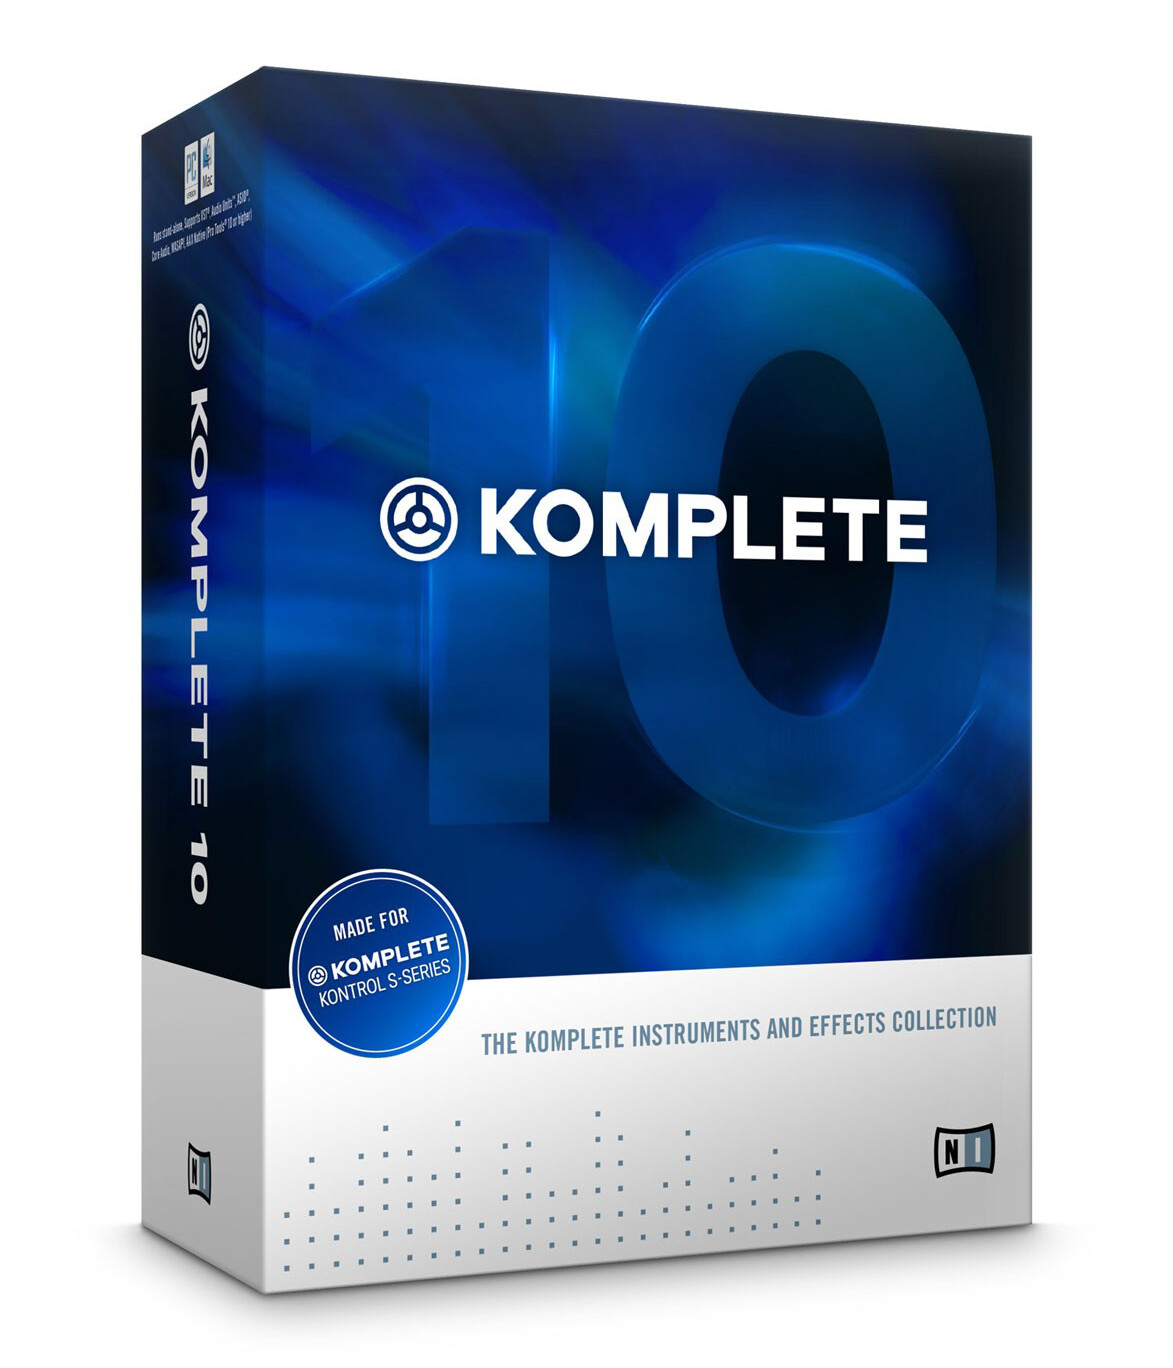 Native Instruments offer on the Komplete series